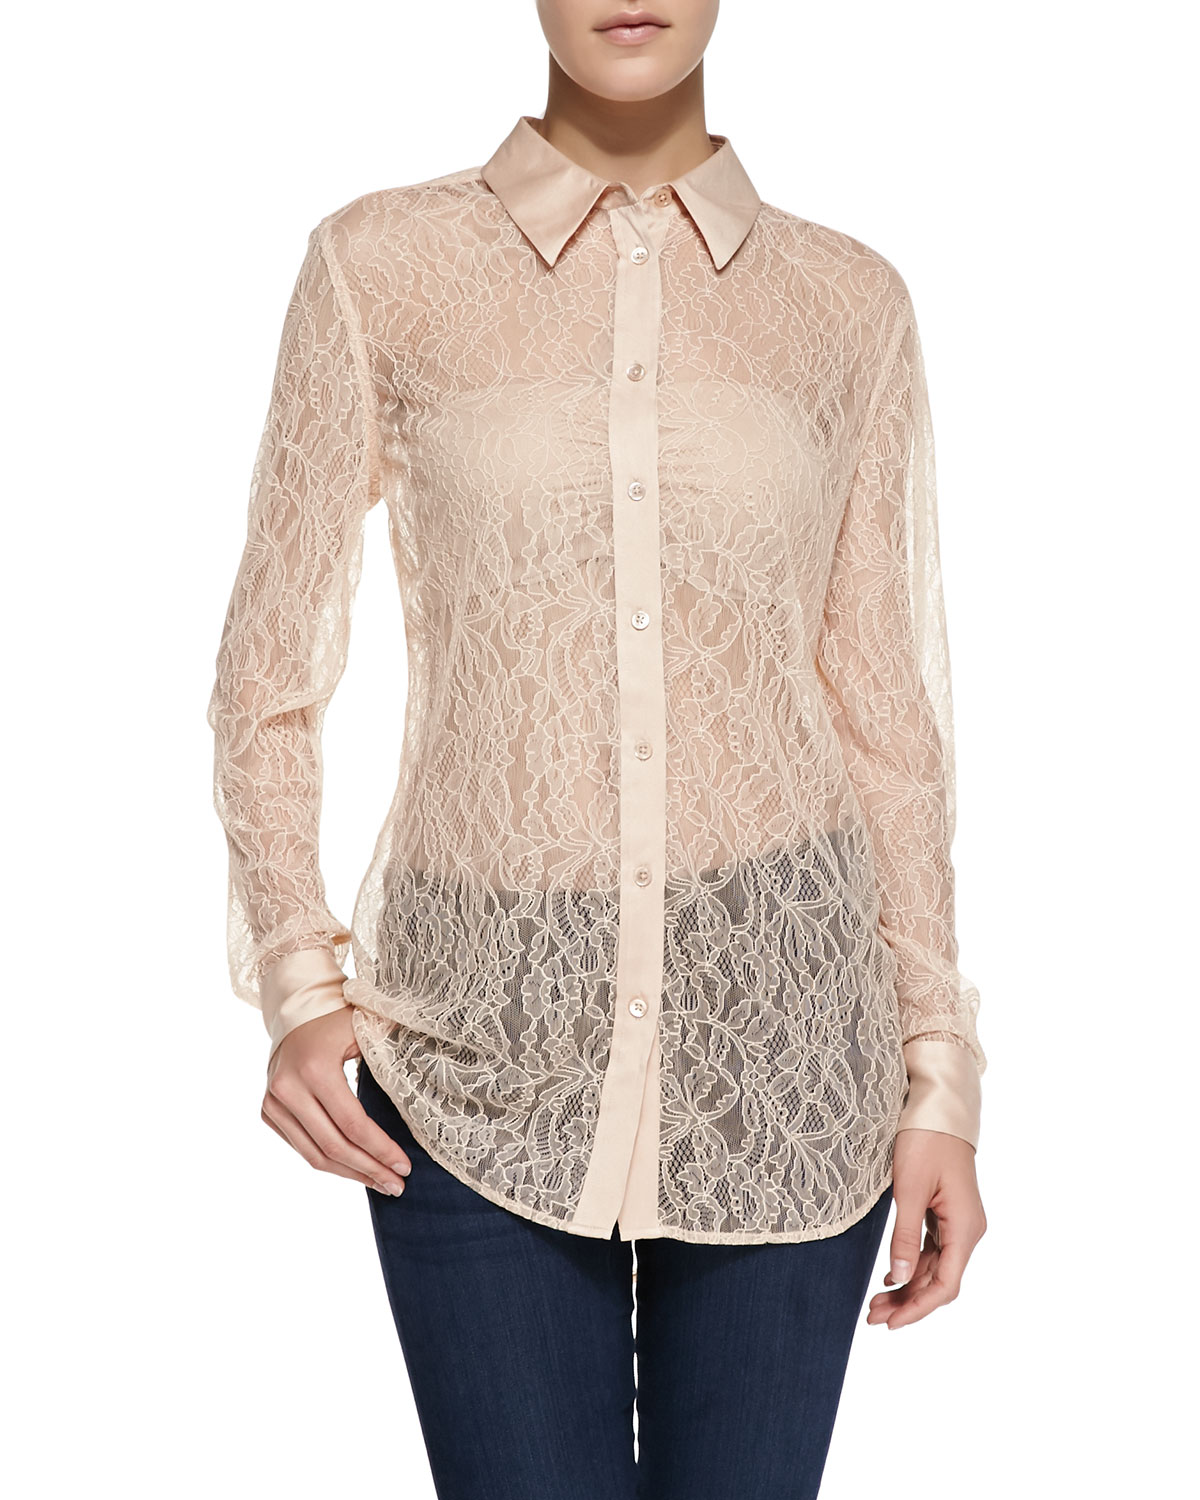 Equipment Reese Clean Long-Sleeve Lace Blouse